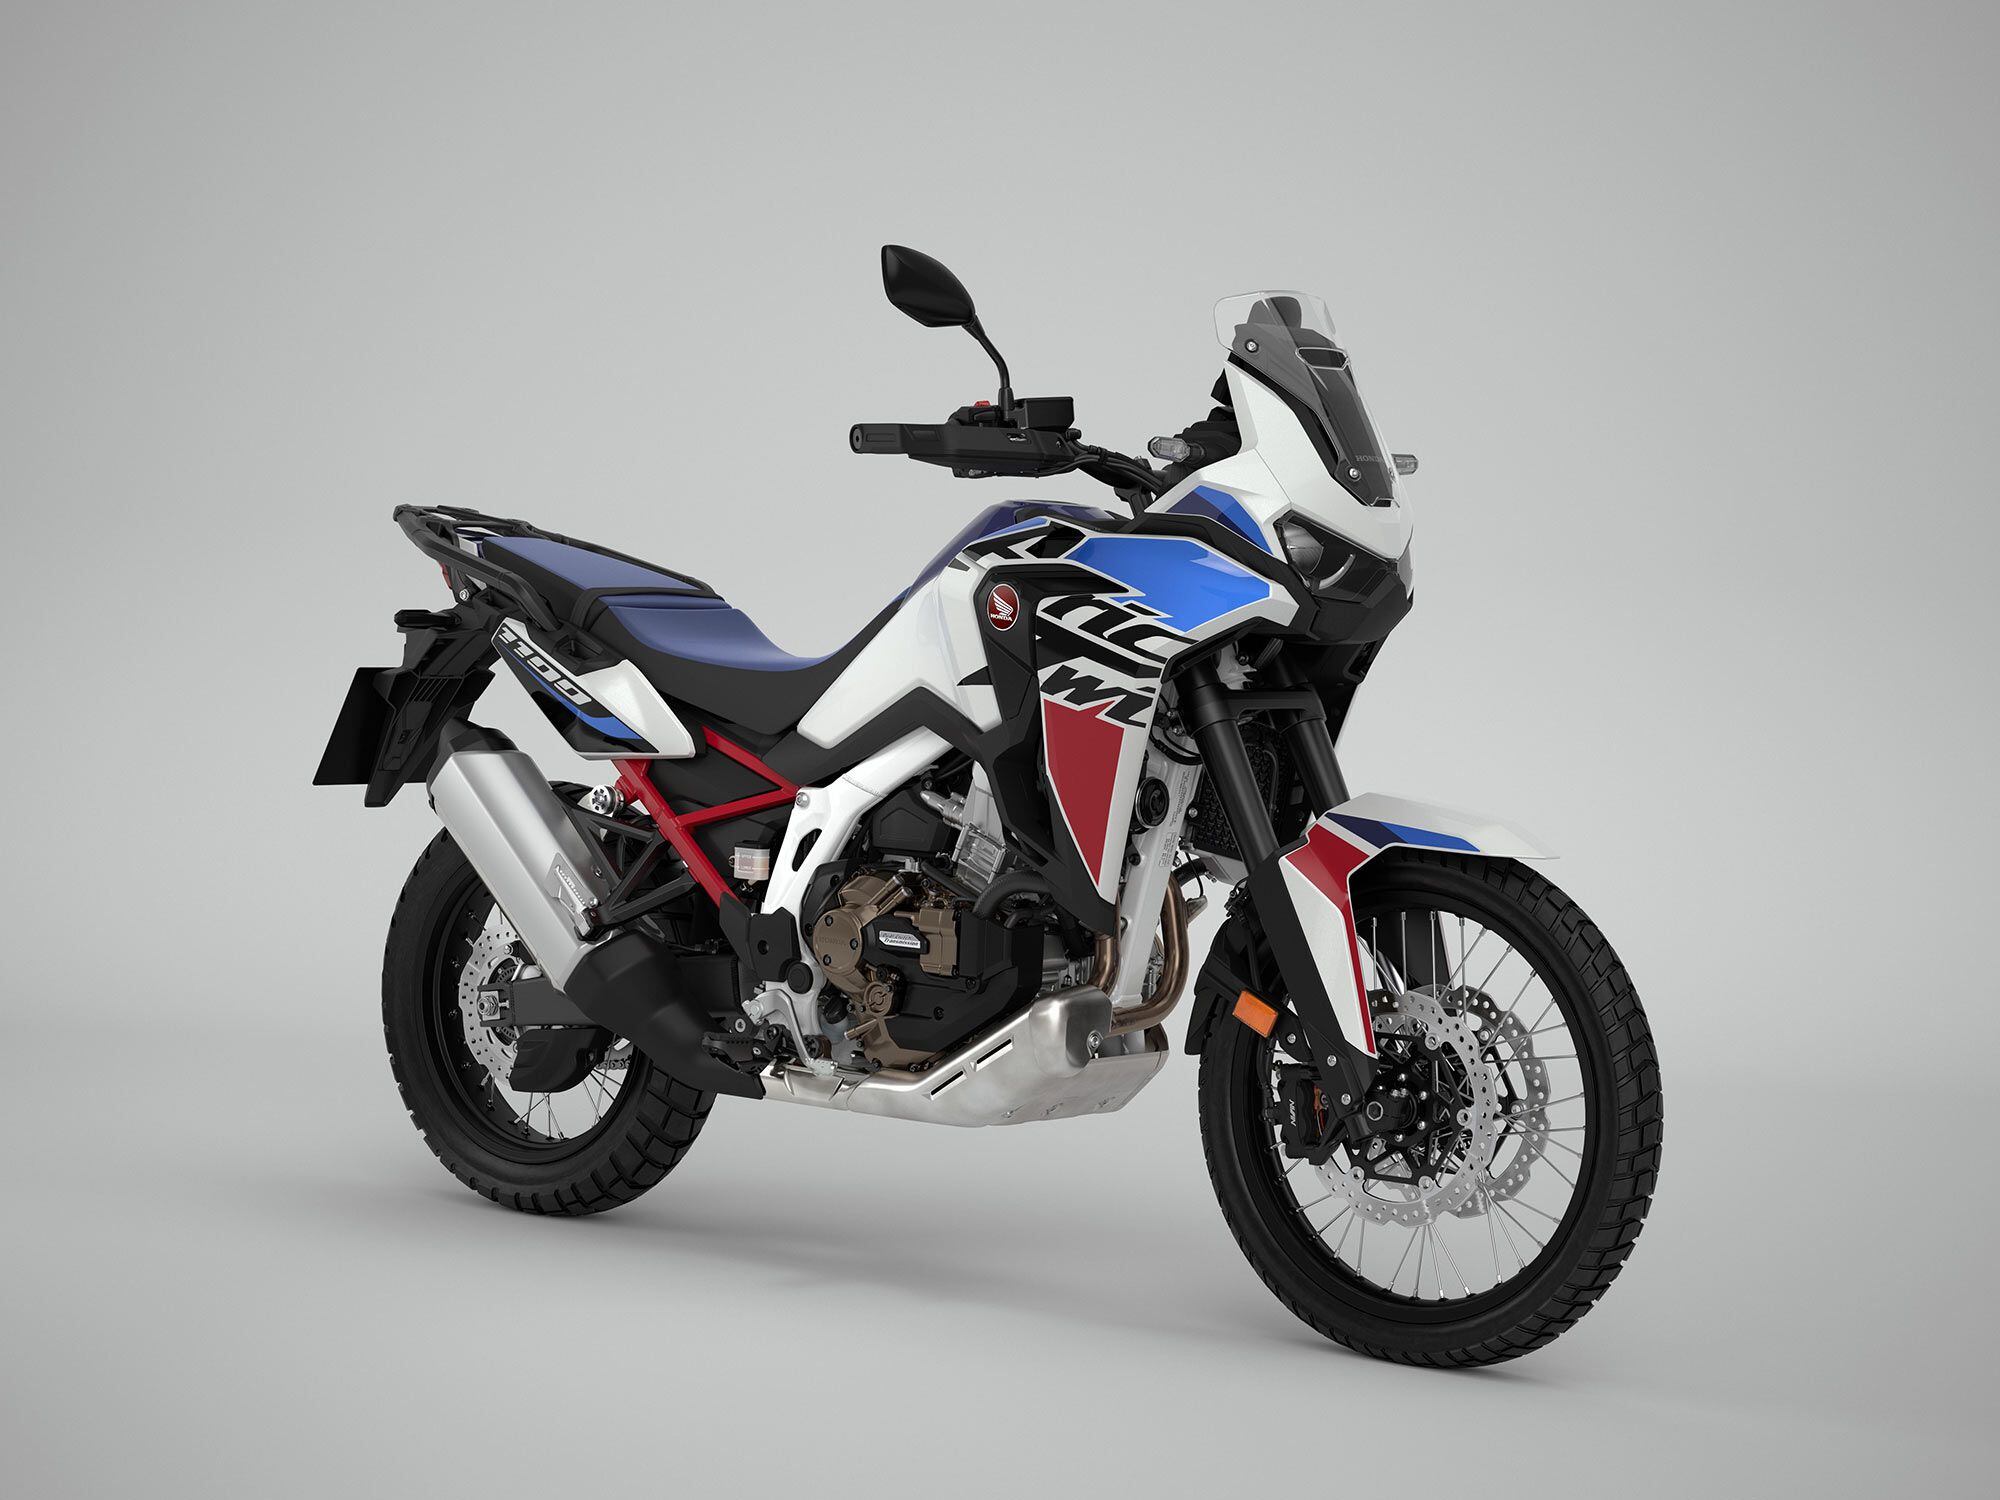 The current CRF1100L is now four years old, and ready for an update.